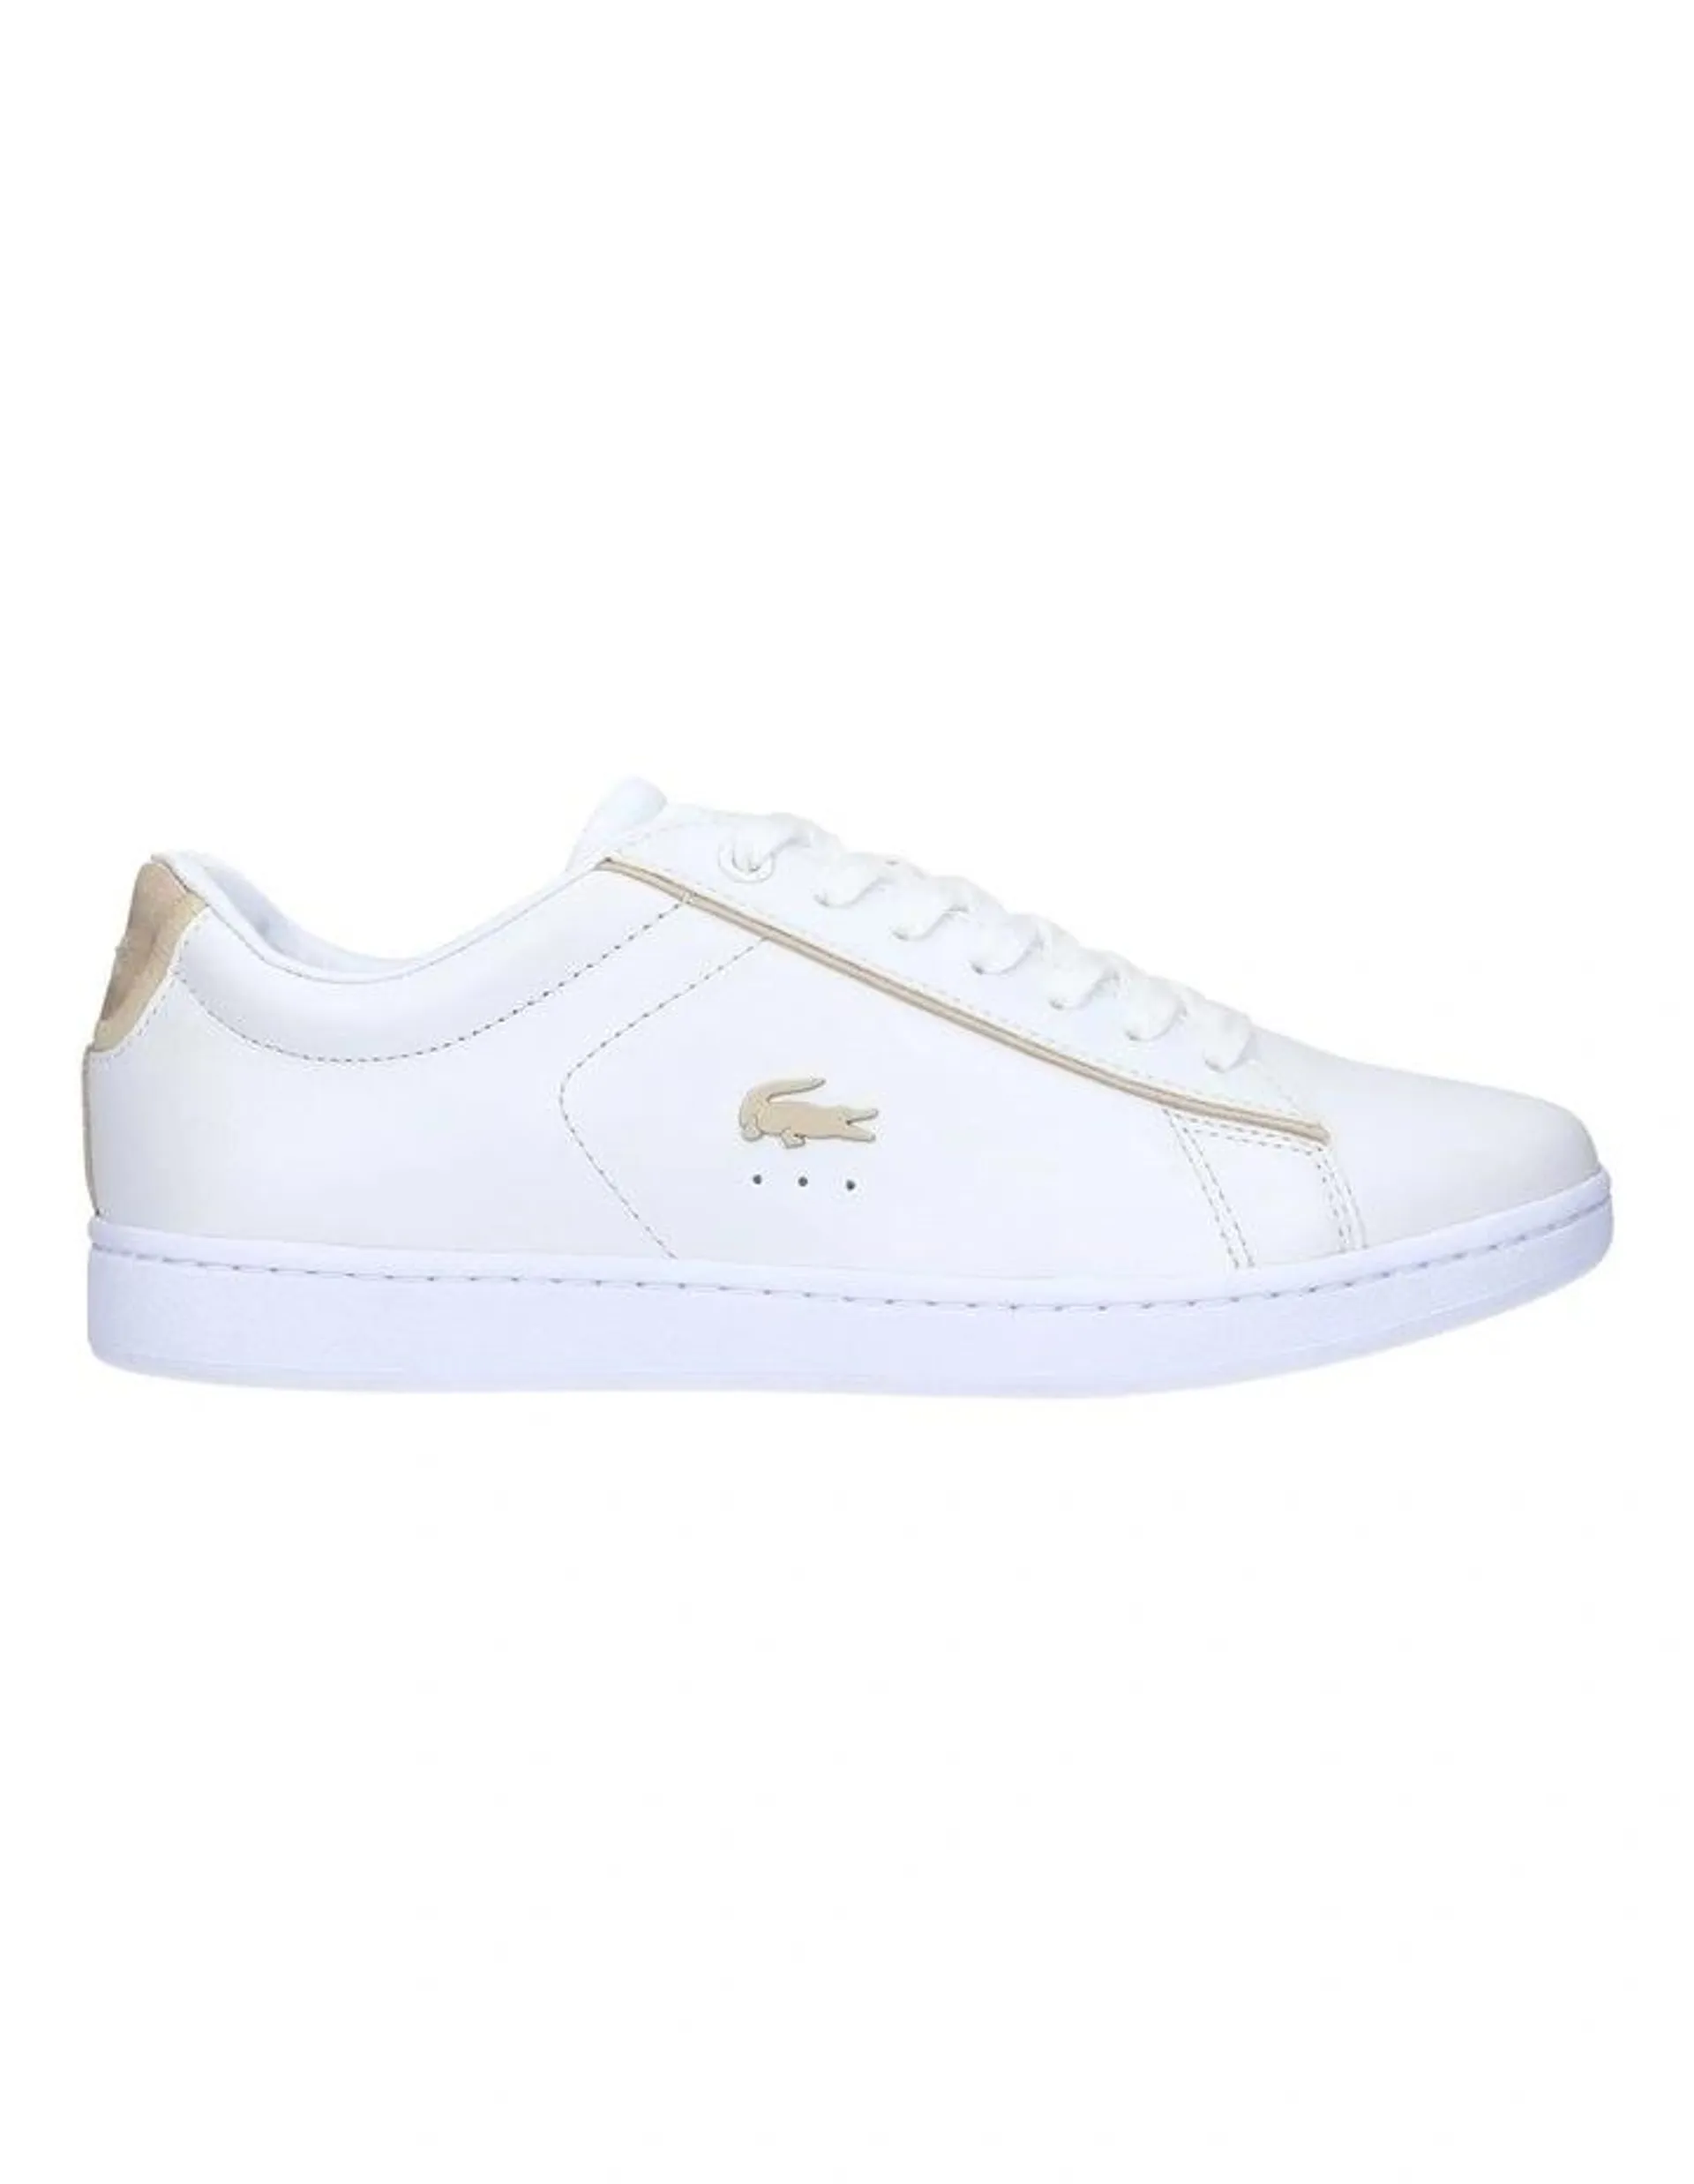 Carnaby Evo White/ Gold Leather Lace-Up Sneaker